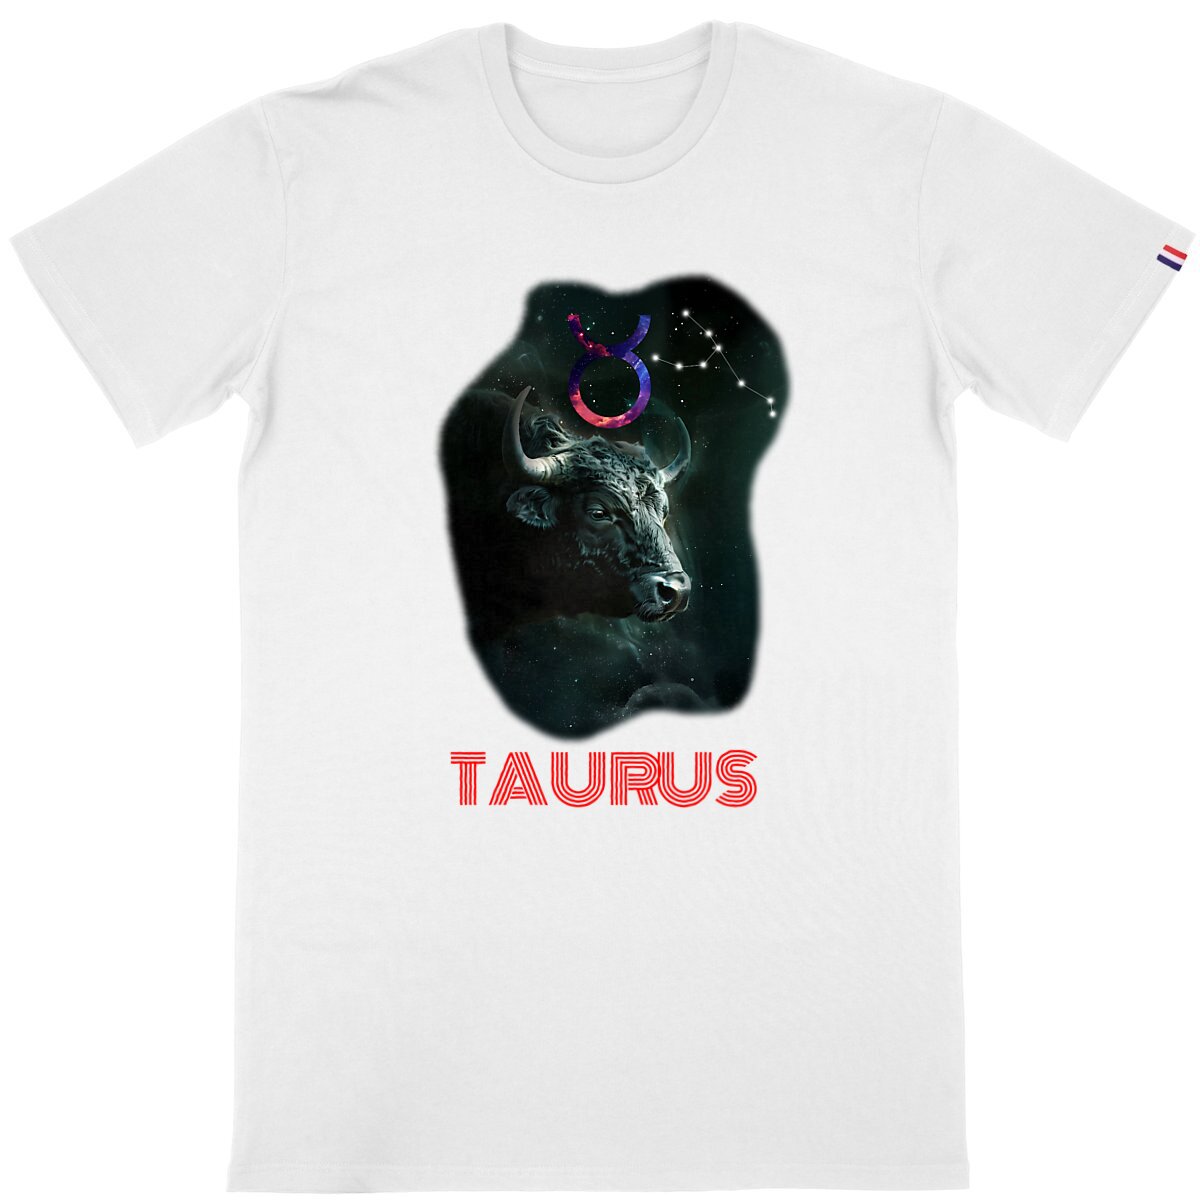 T-shirt "Taurus" Made in France - Homme